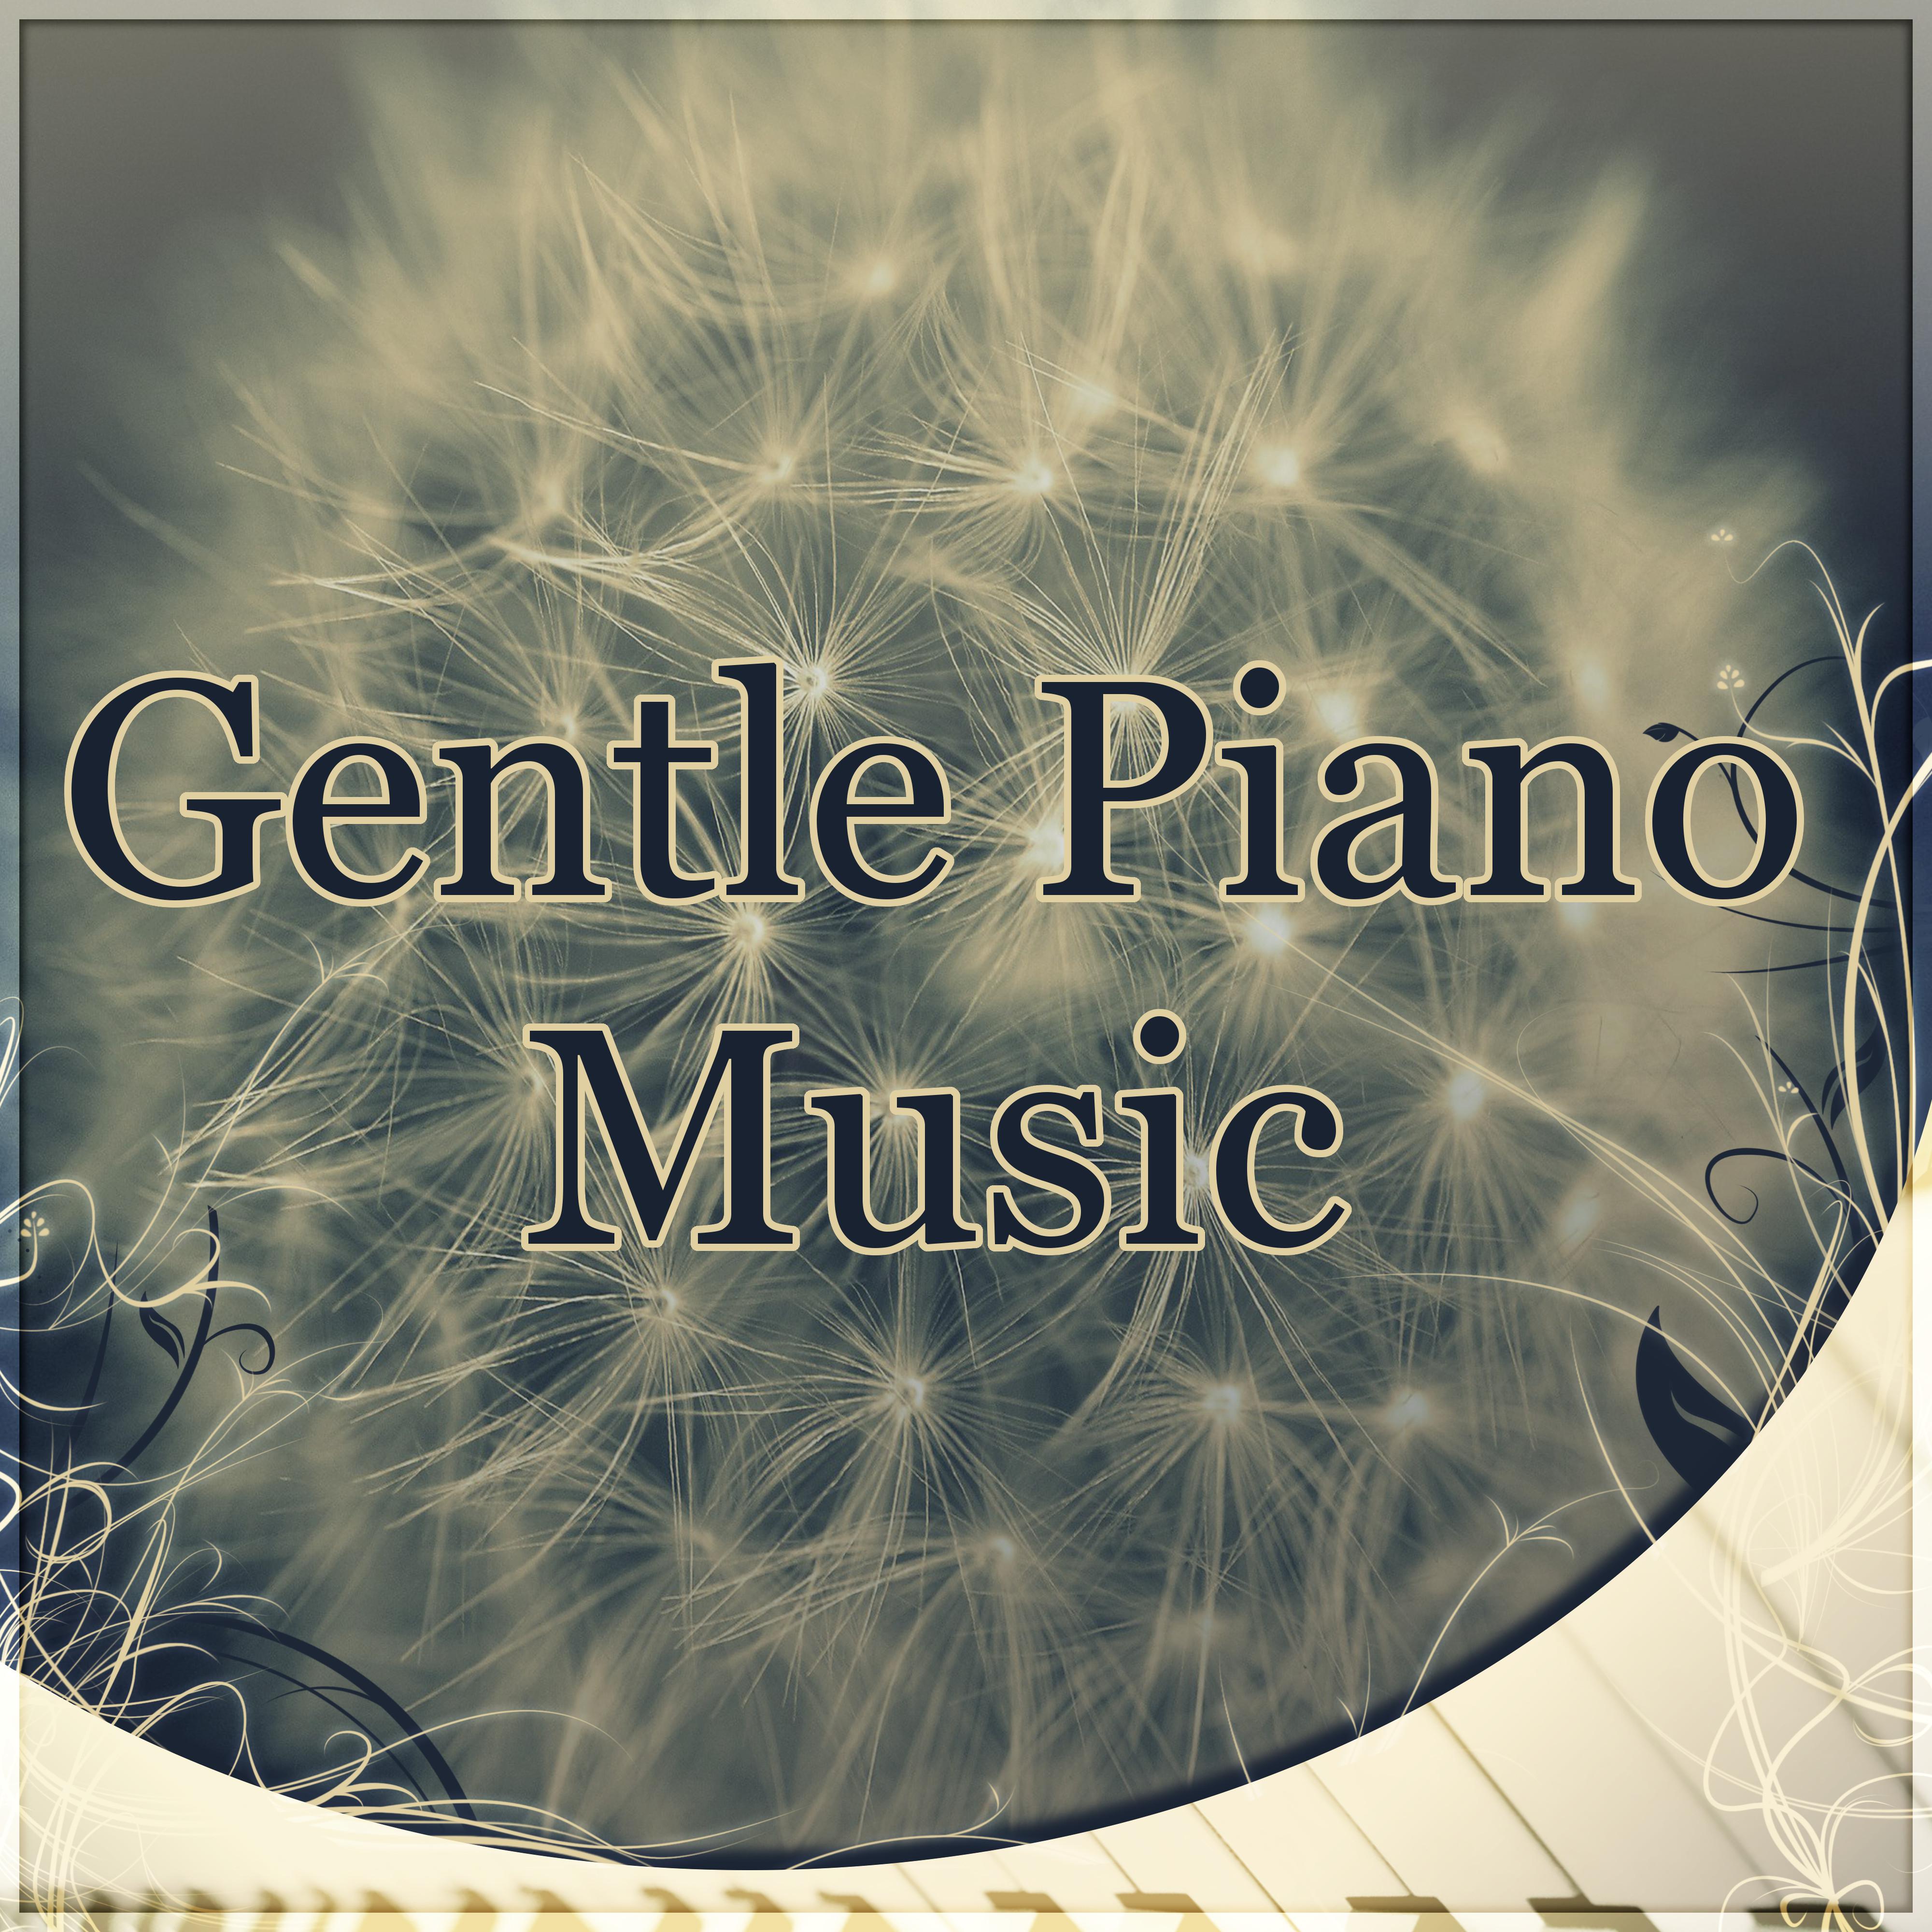 Gentle Piano Music – Natural Sleep Aid, White Noise for Deep Sleep, Lullabies with Relaxing Nature Sounds, Sleep Through the Night, Calm Music to Fall Asleep